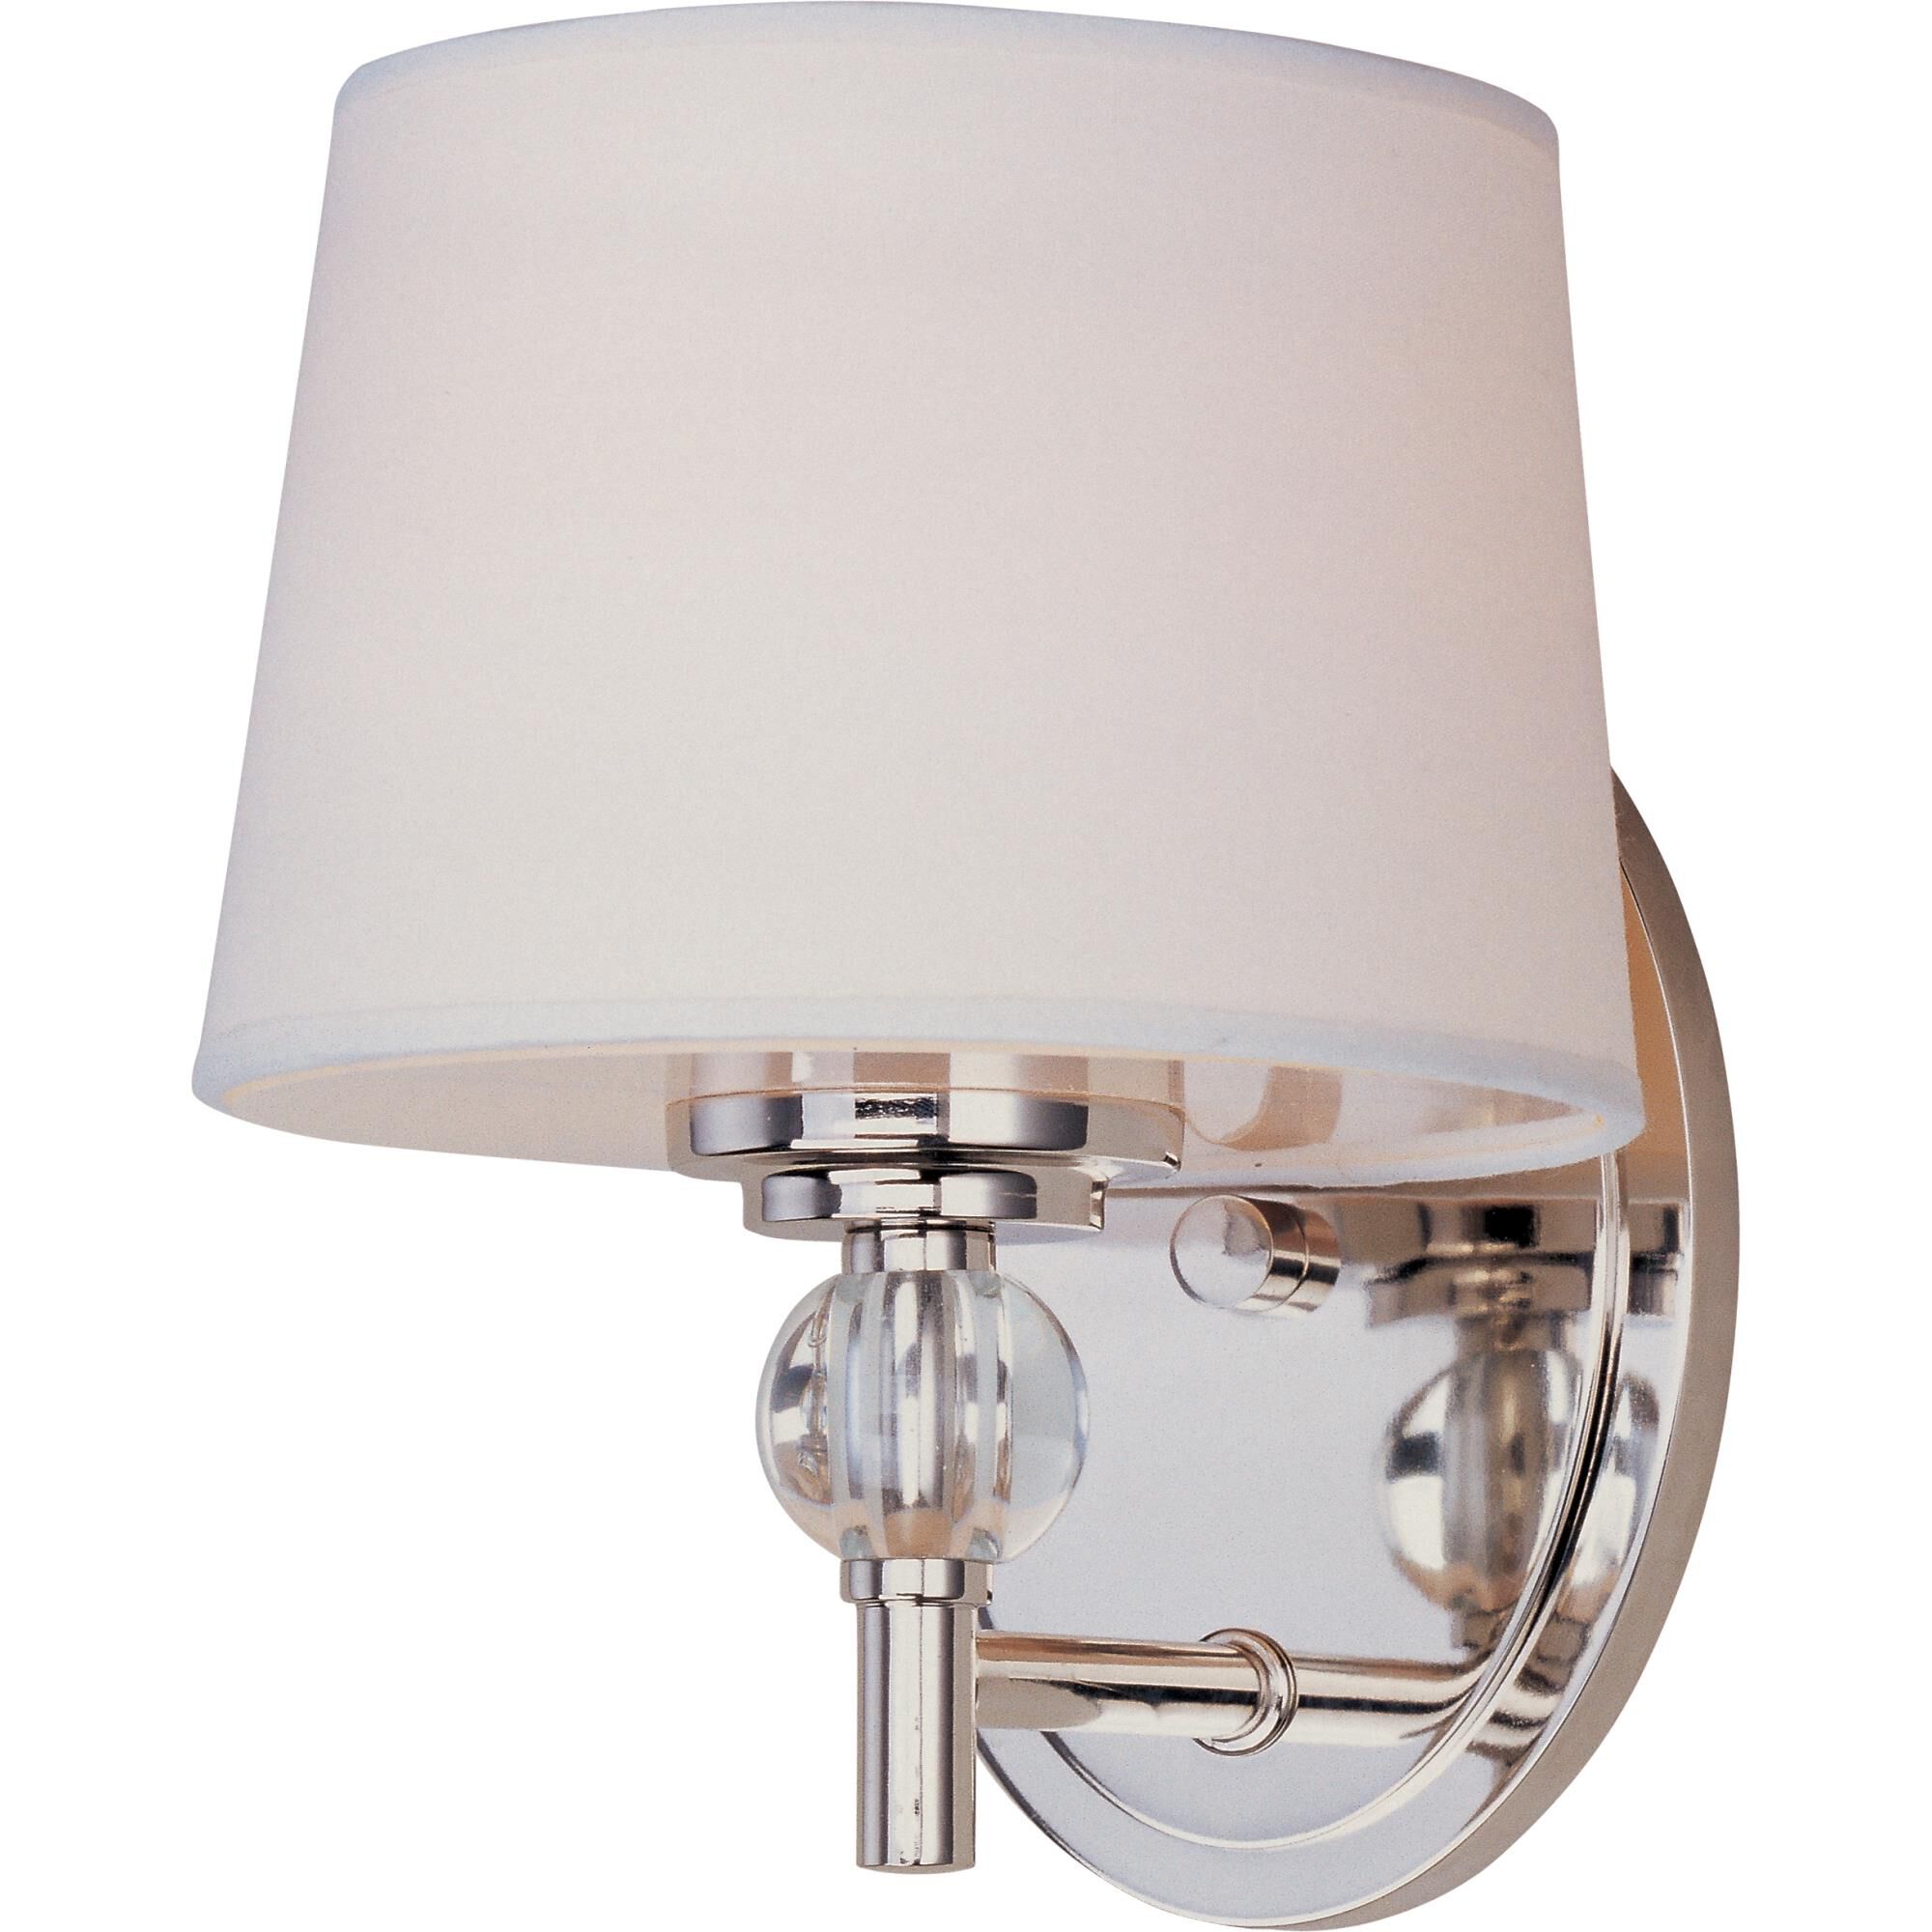 Photos - Chandelier / Lamp Maxim Lighting Rondo 8 Inch Wall Sconce Rondo - 12761WTPN - Transitional 1